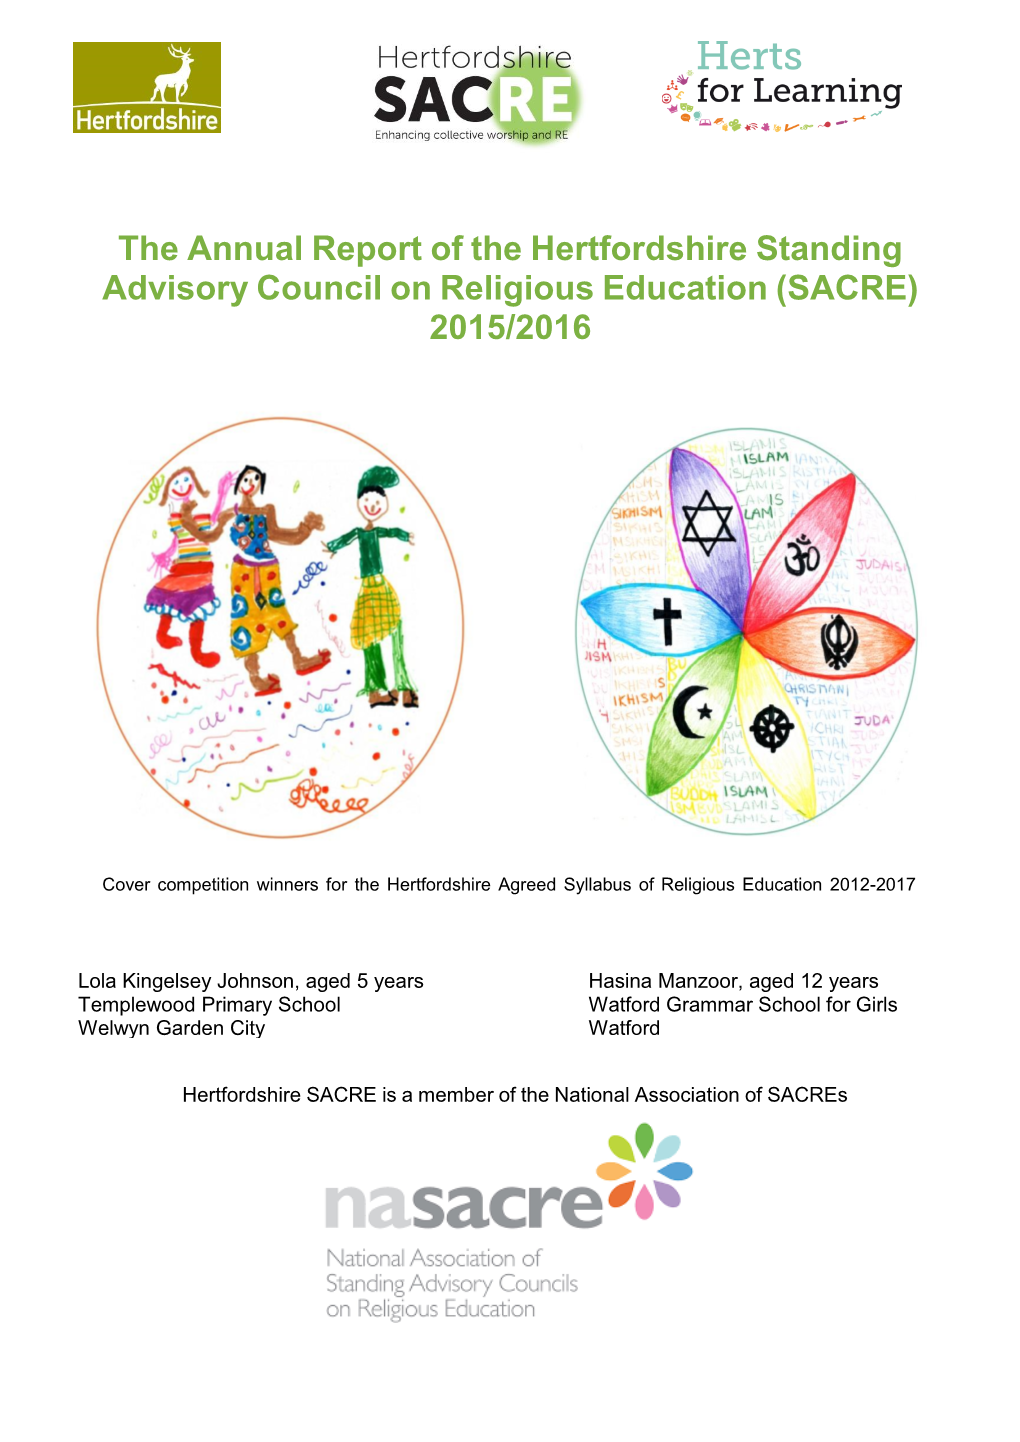 The Annual Report of the Hertfordshire Standing Advisory Council on Religious Education (SACRE) 2015/2016